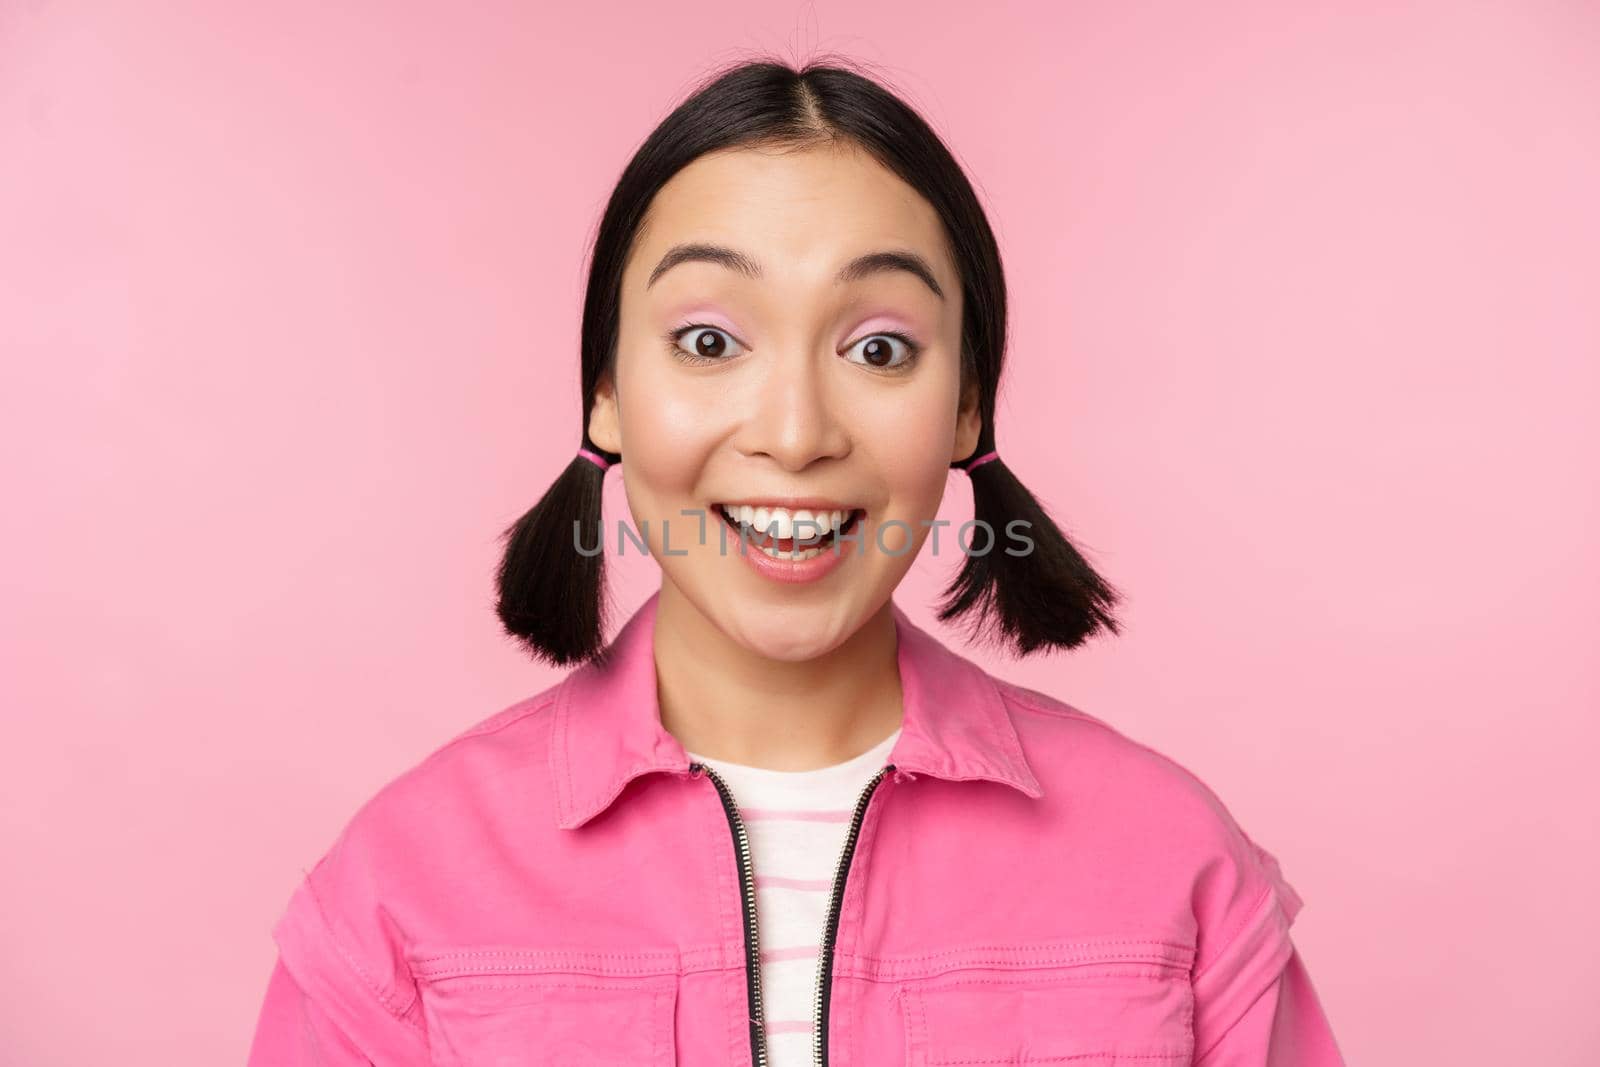 Close up portrait of beautiful asian girl looking enthusiastic and smiling, laughing and smiling, standing happy against pink background.